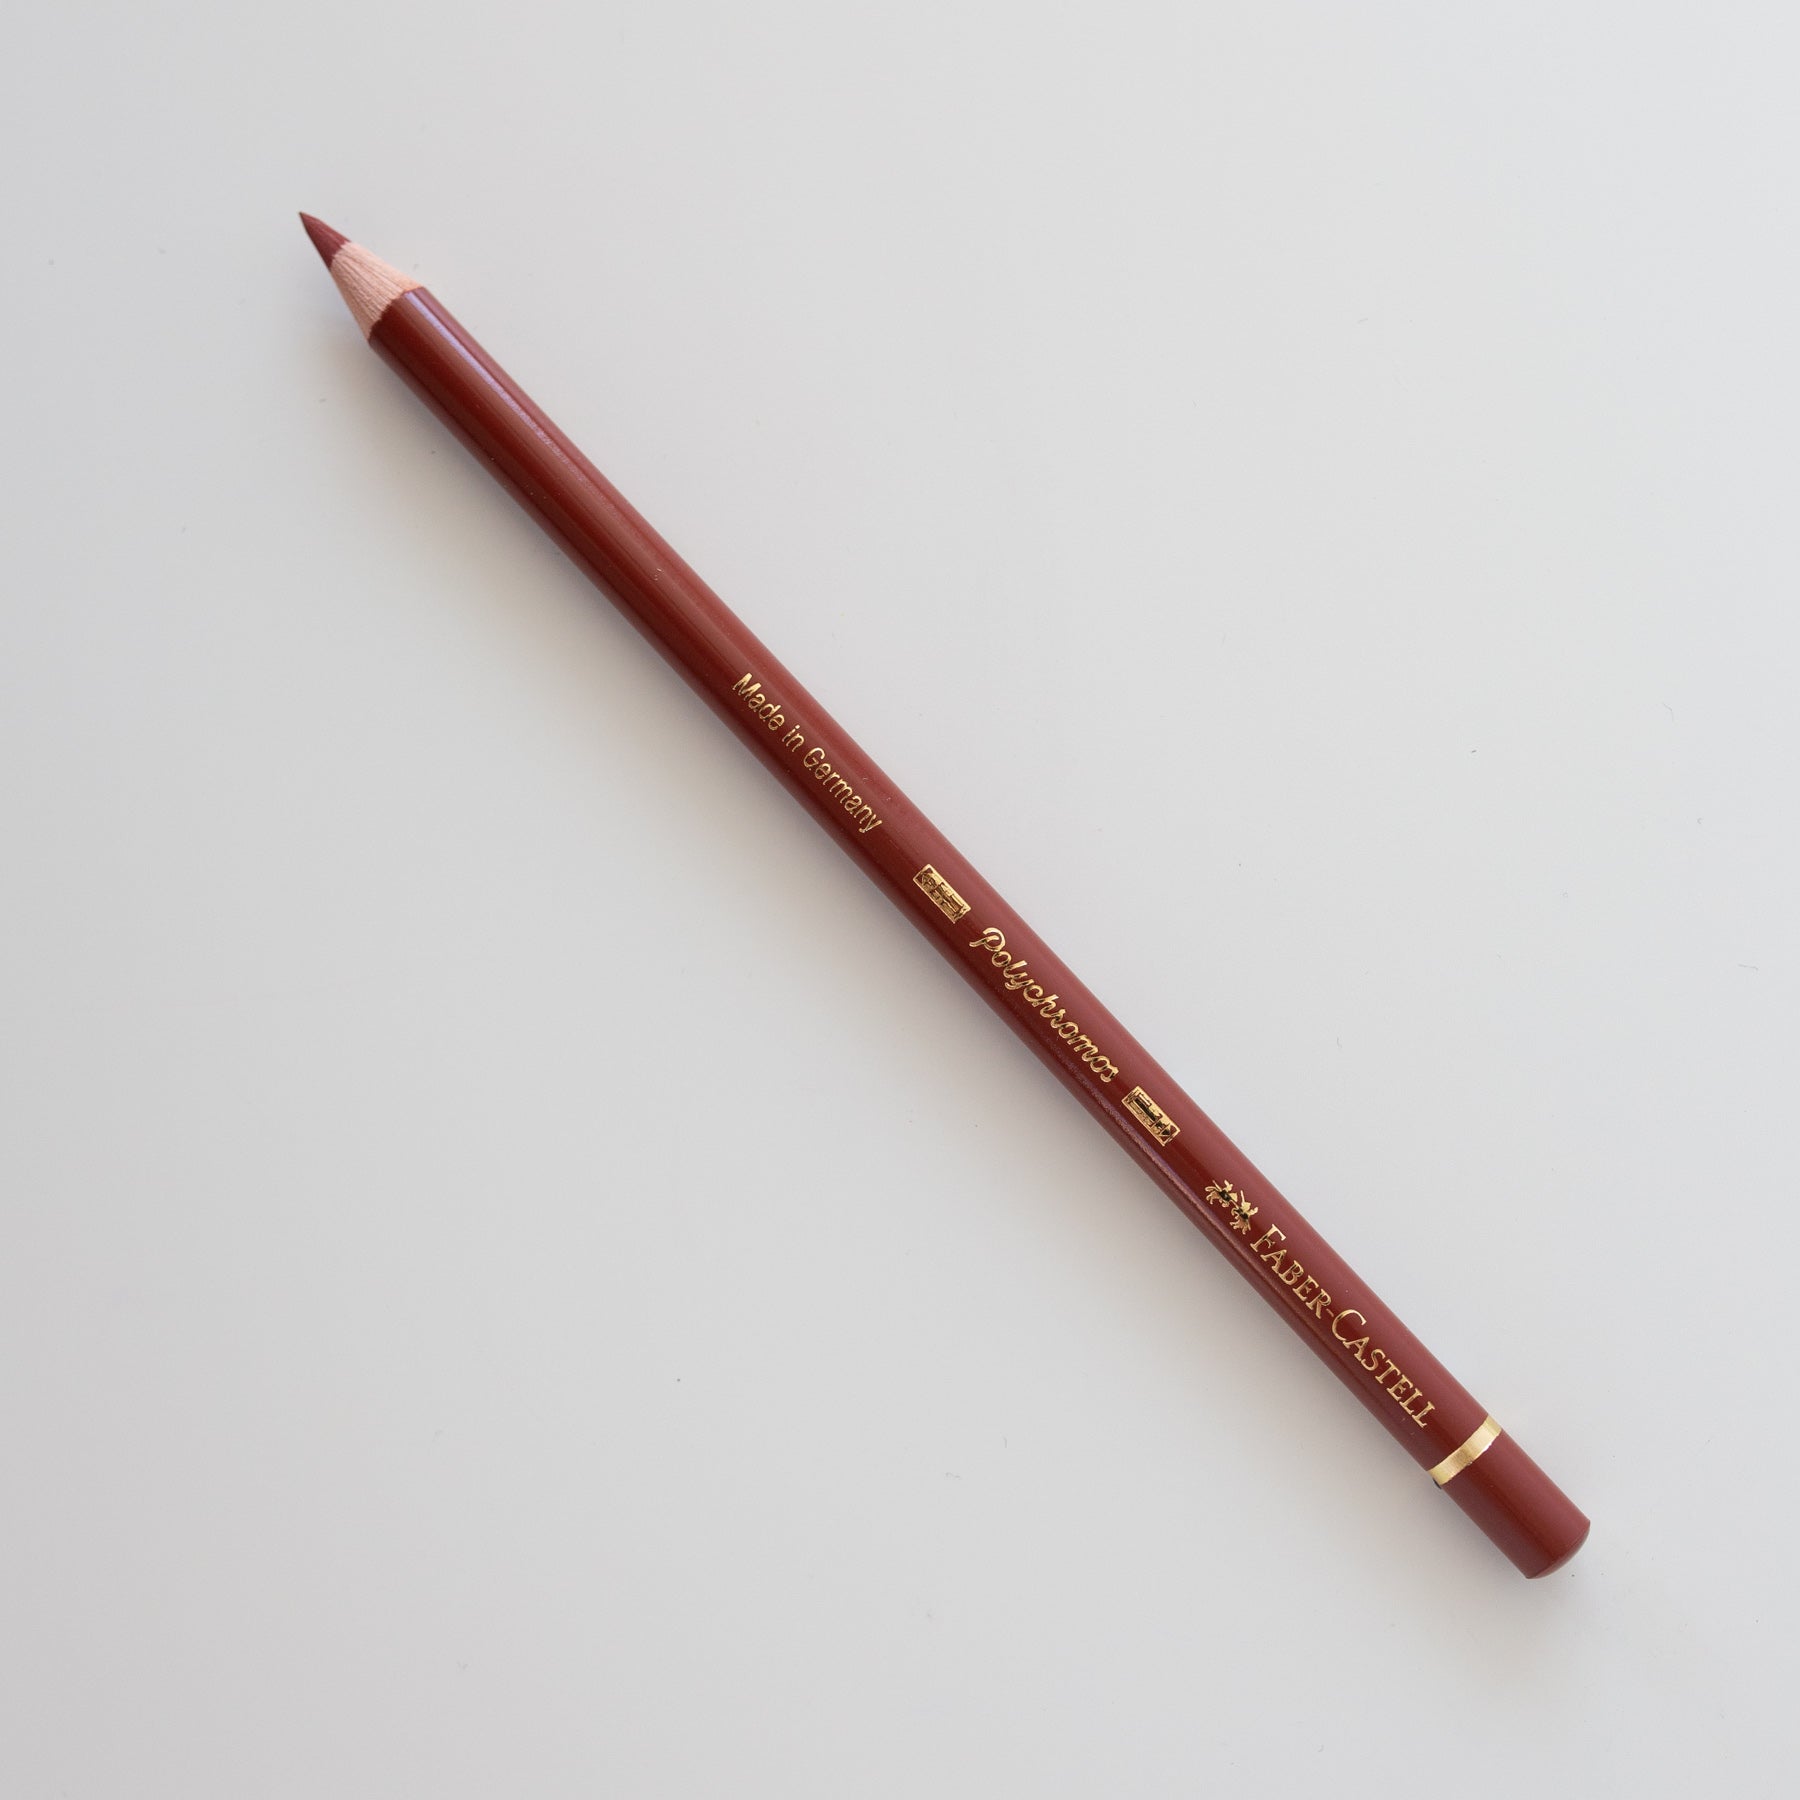 Faber-Castell Pitt Pastel Pencil, No. 192 - India Red (Box of 12)